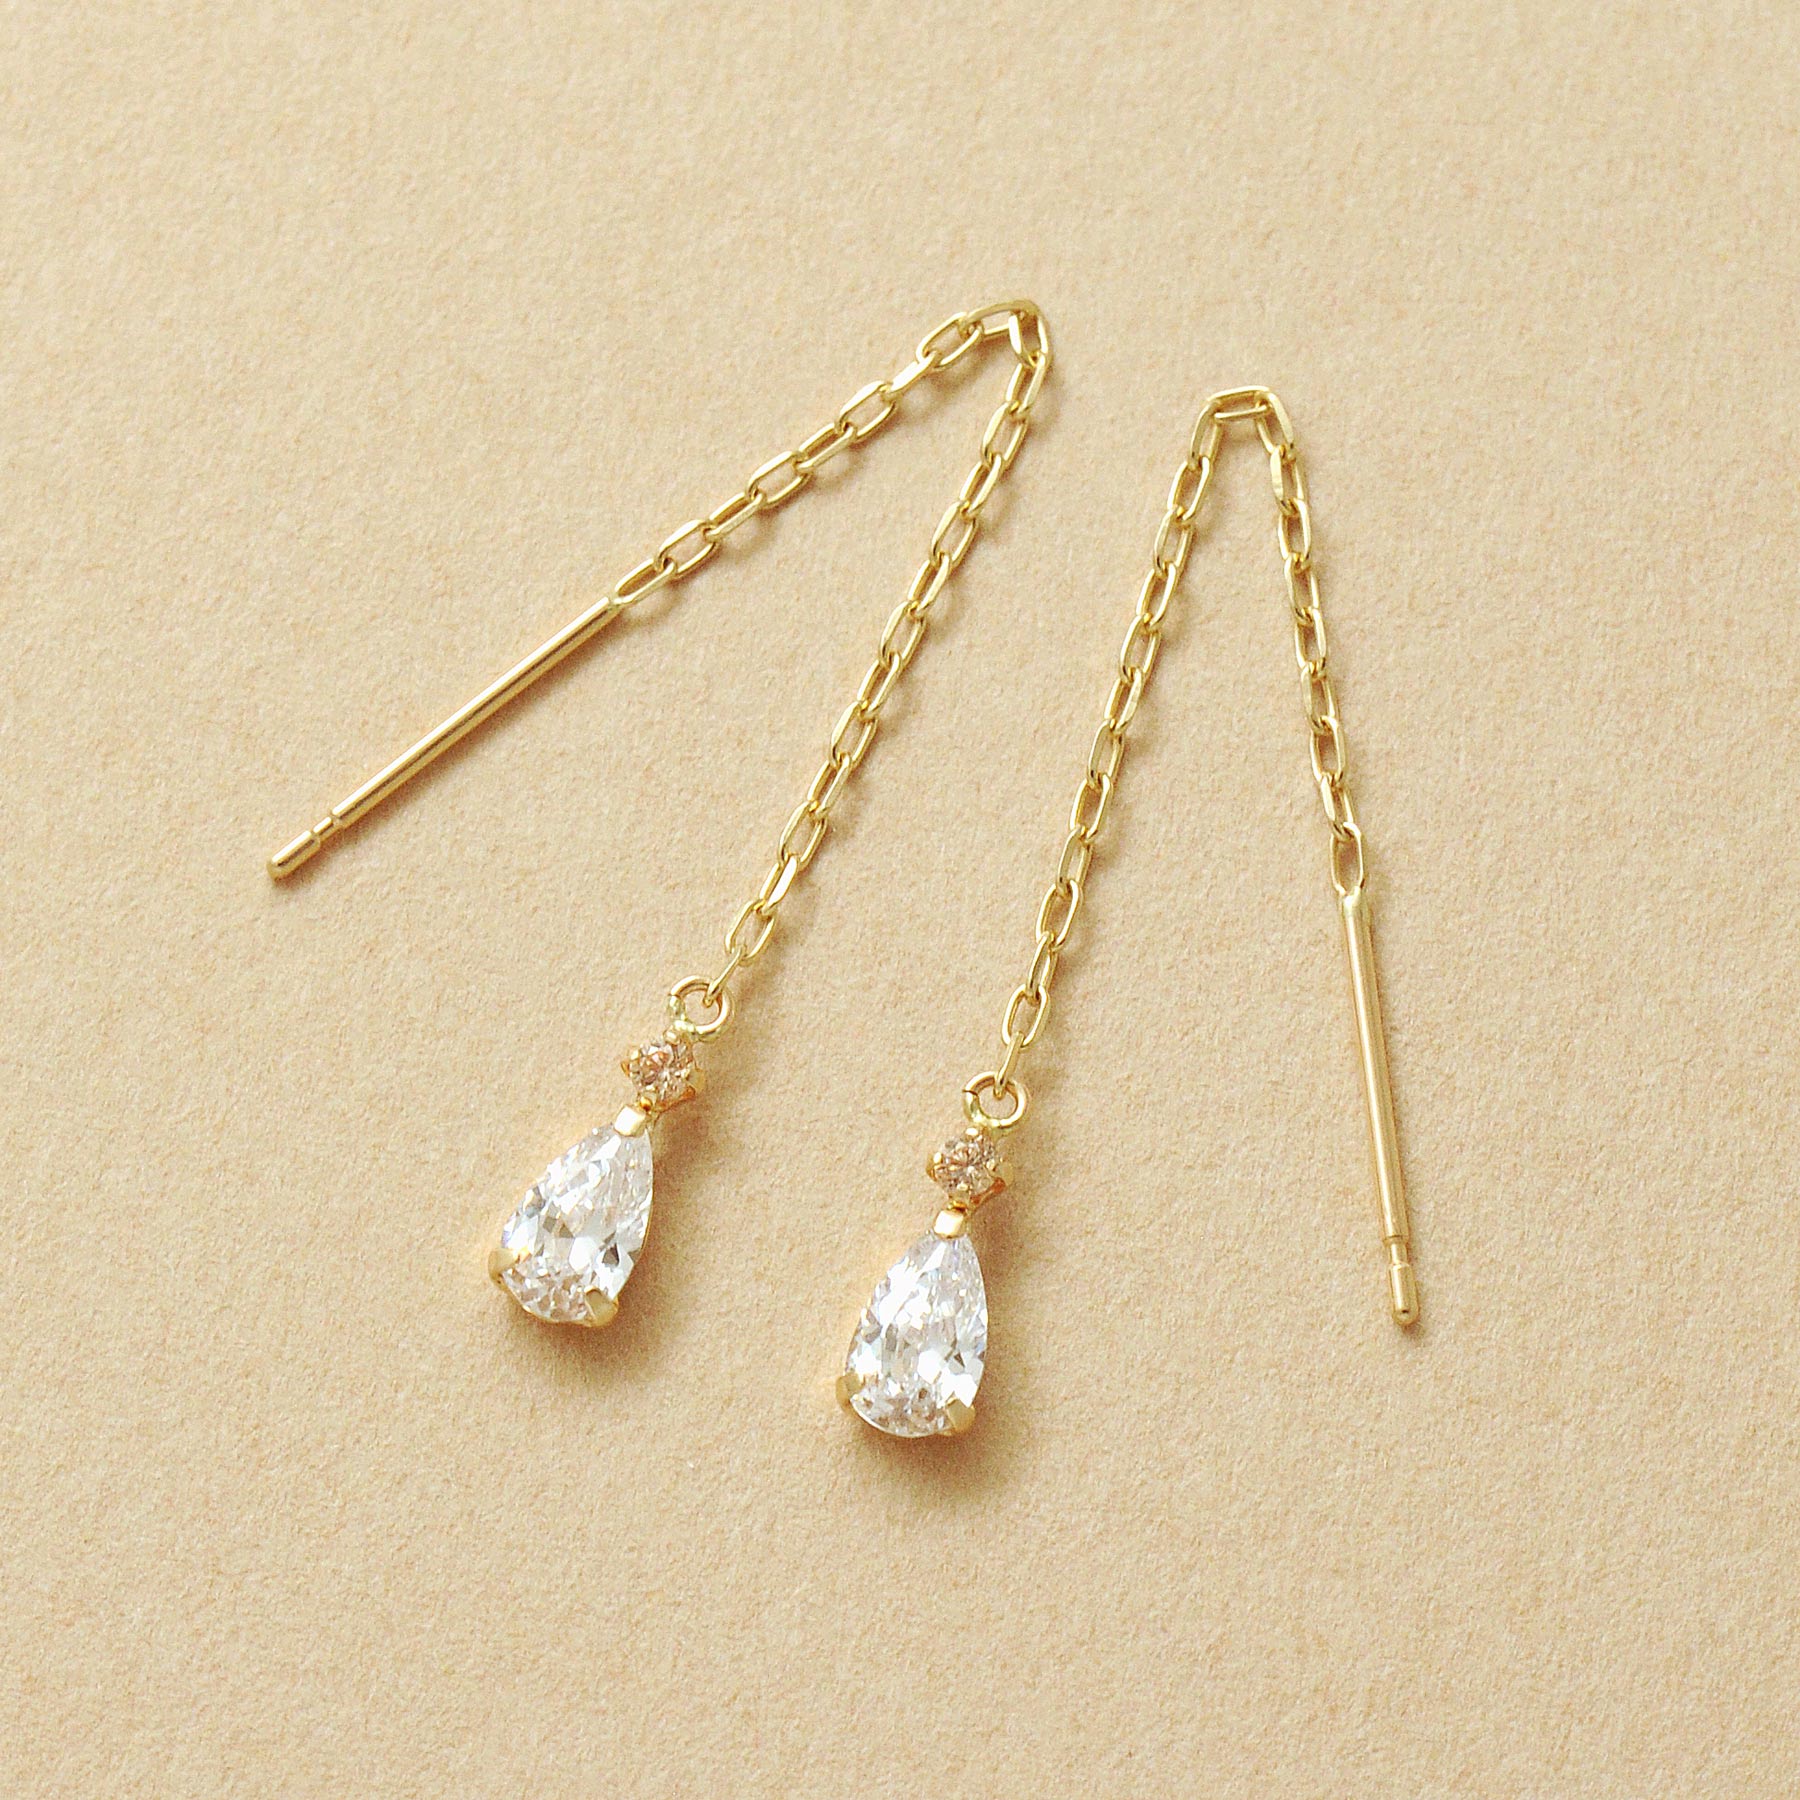 10K Drop Threader Earrings (Yellow Gold) - Product Image